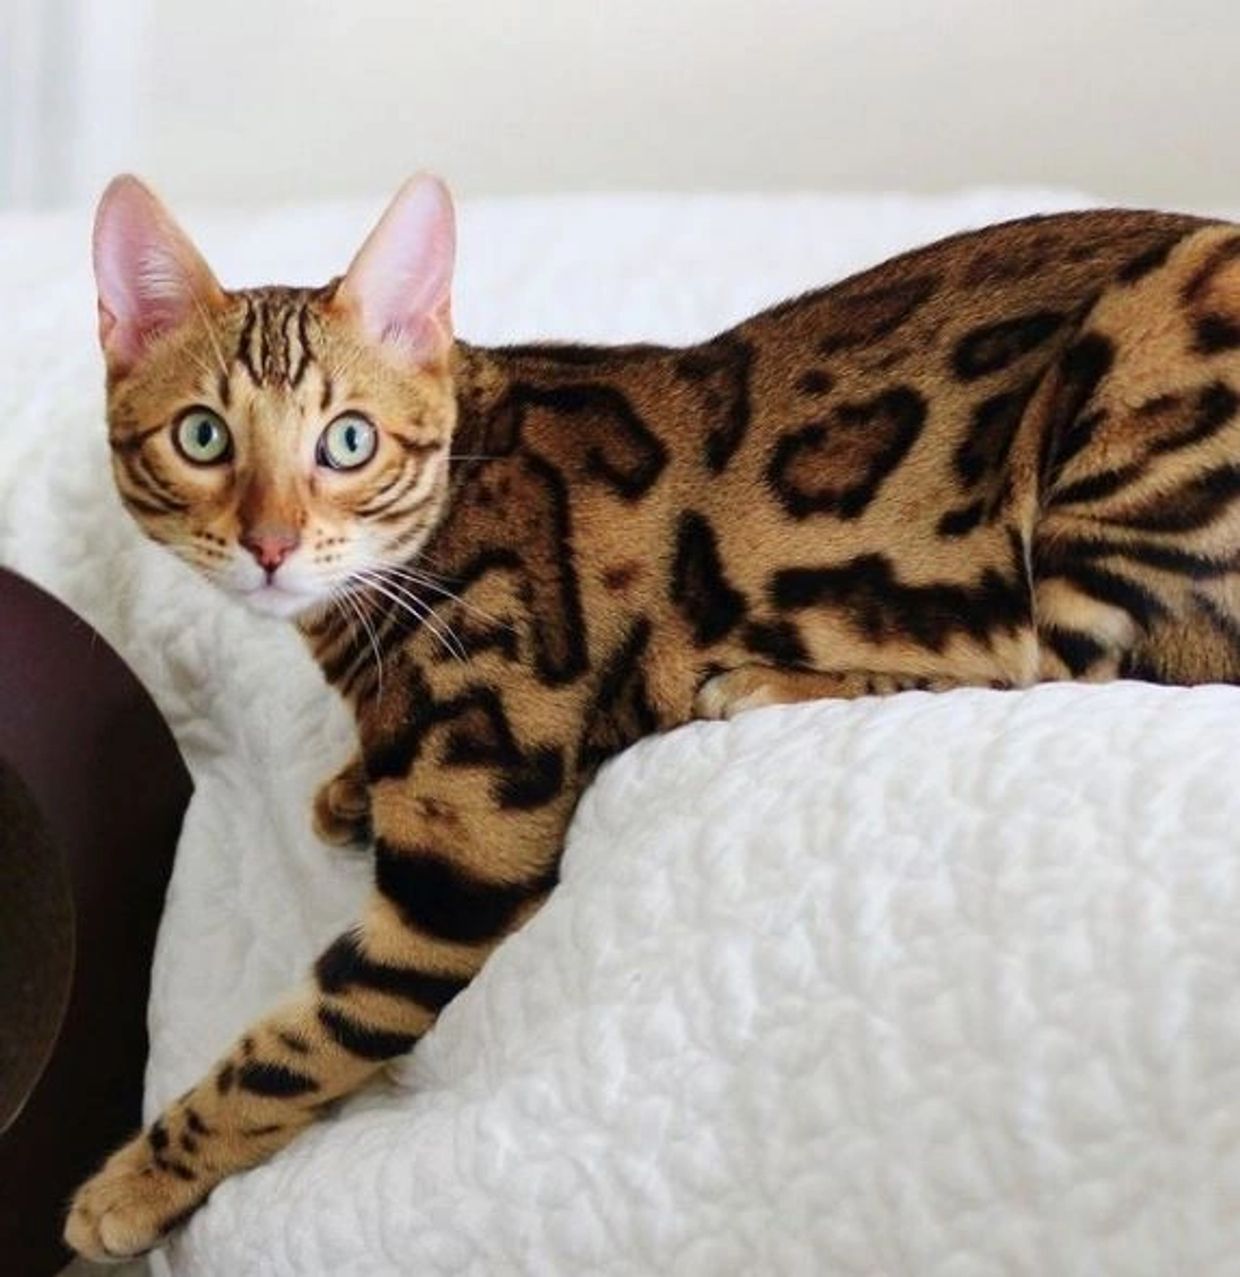 Exotic Bengals of Hollywood presents top quality, adorable, purebred Bengal kittens for sale